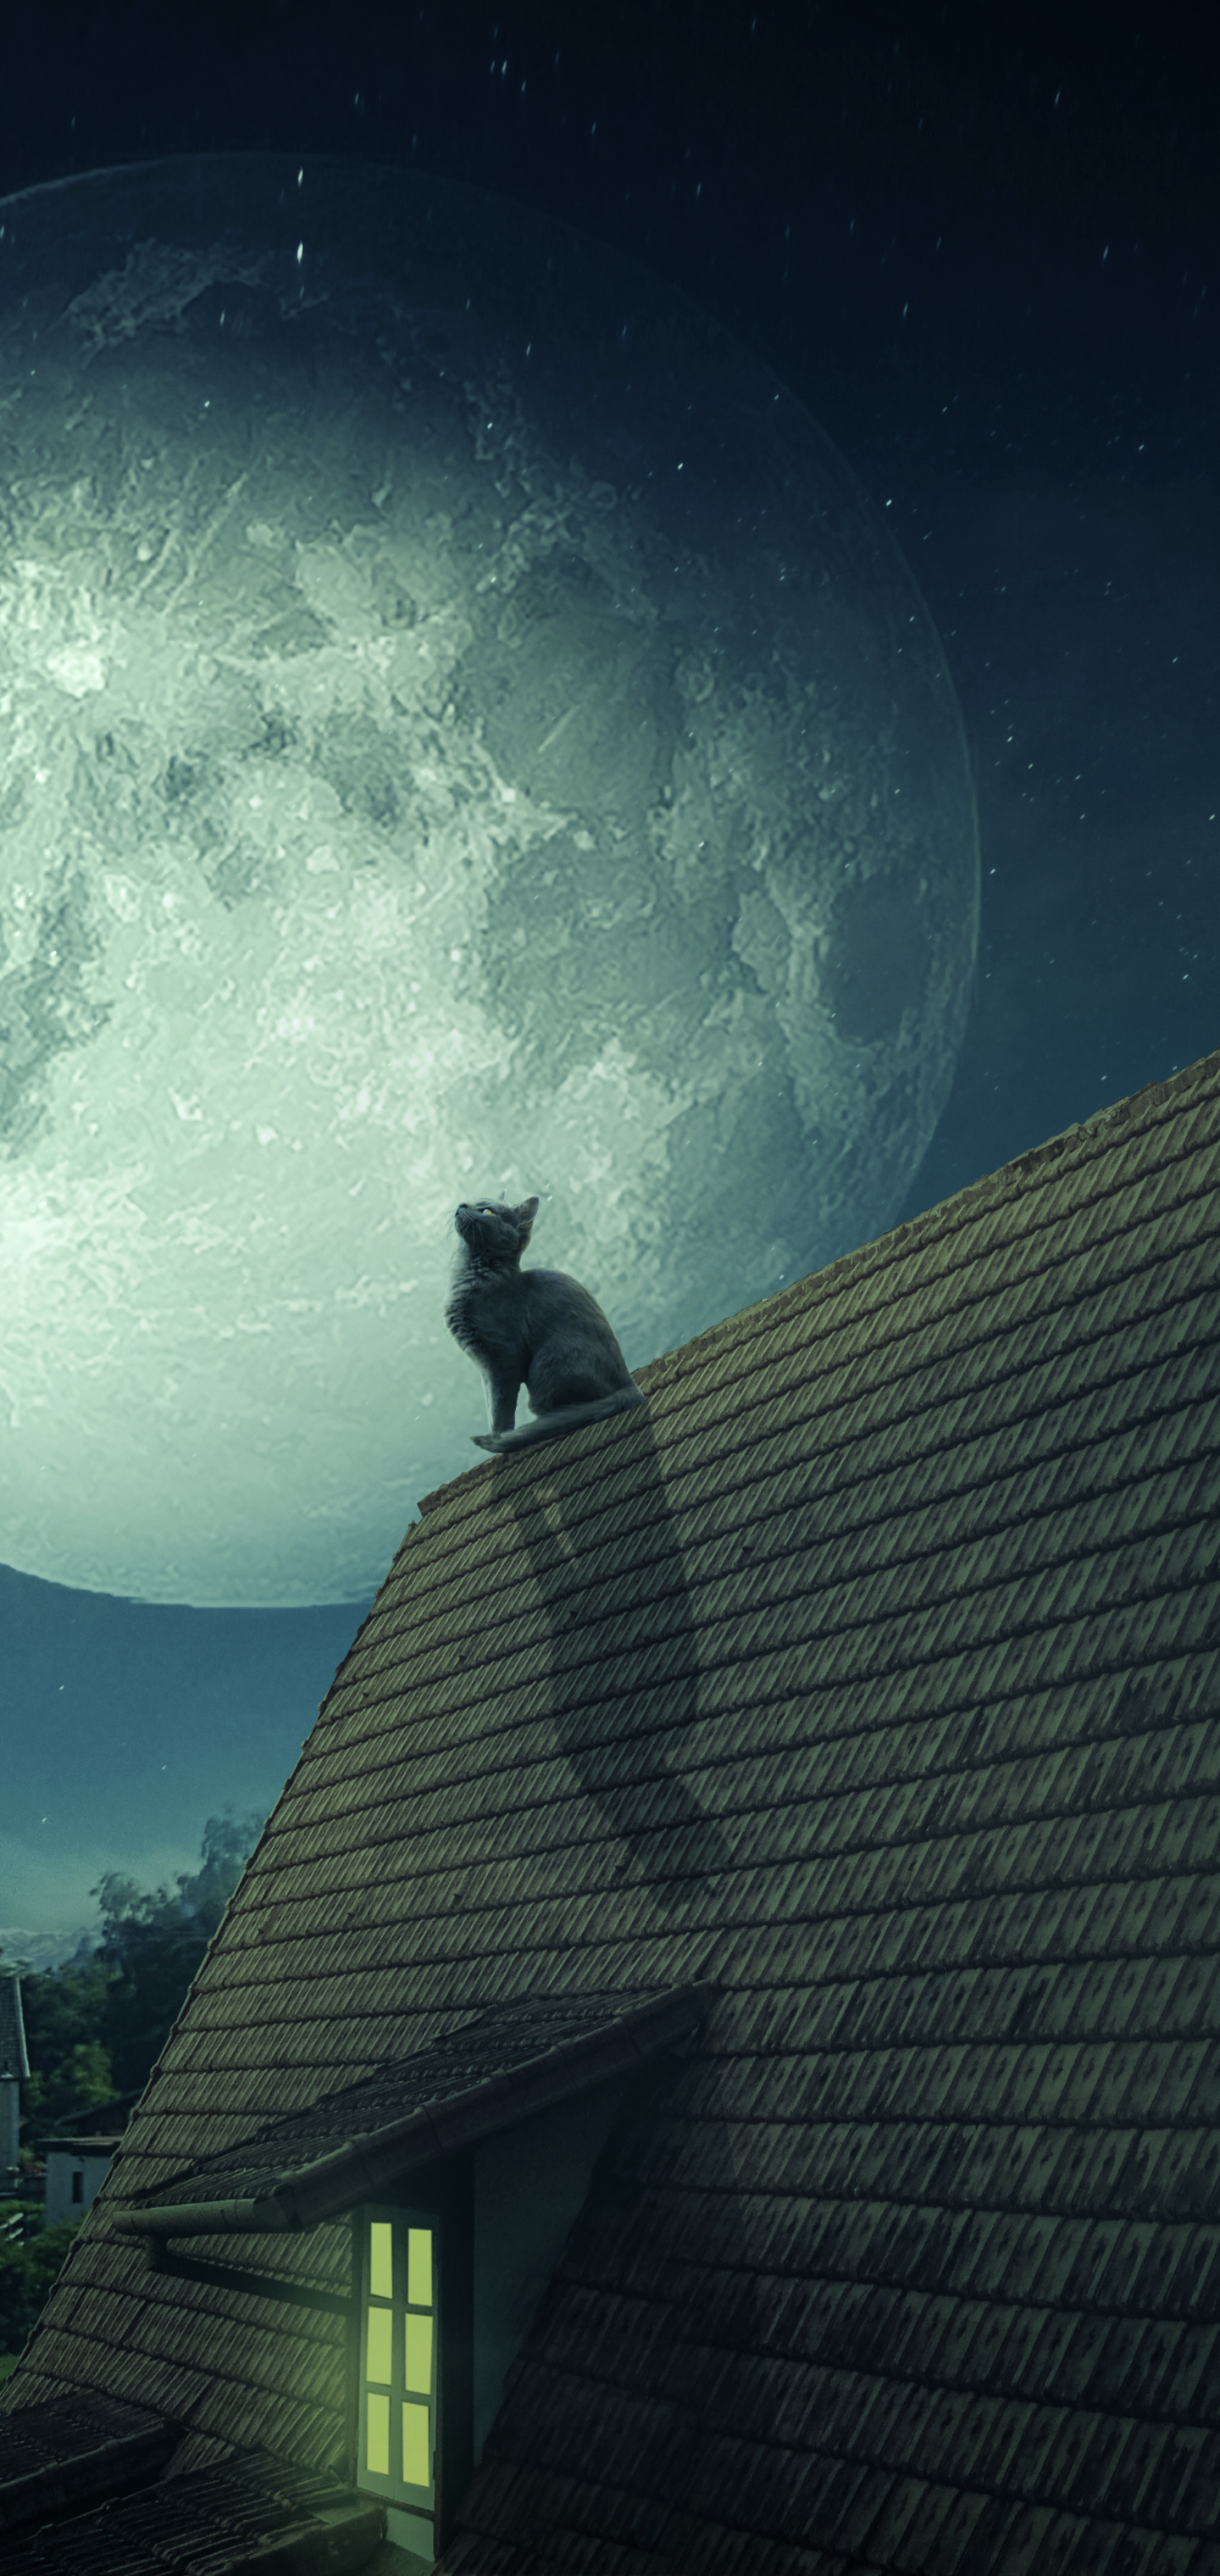 Mobile wallpaper: Cats, Night, Moon, Cat, Animal, Roof, 1171964 download  the picture for free.